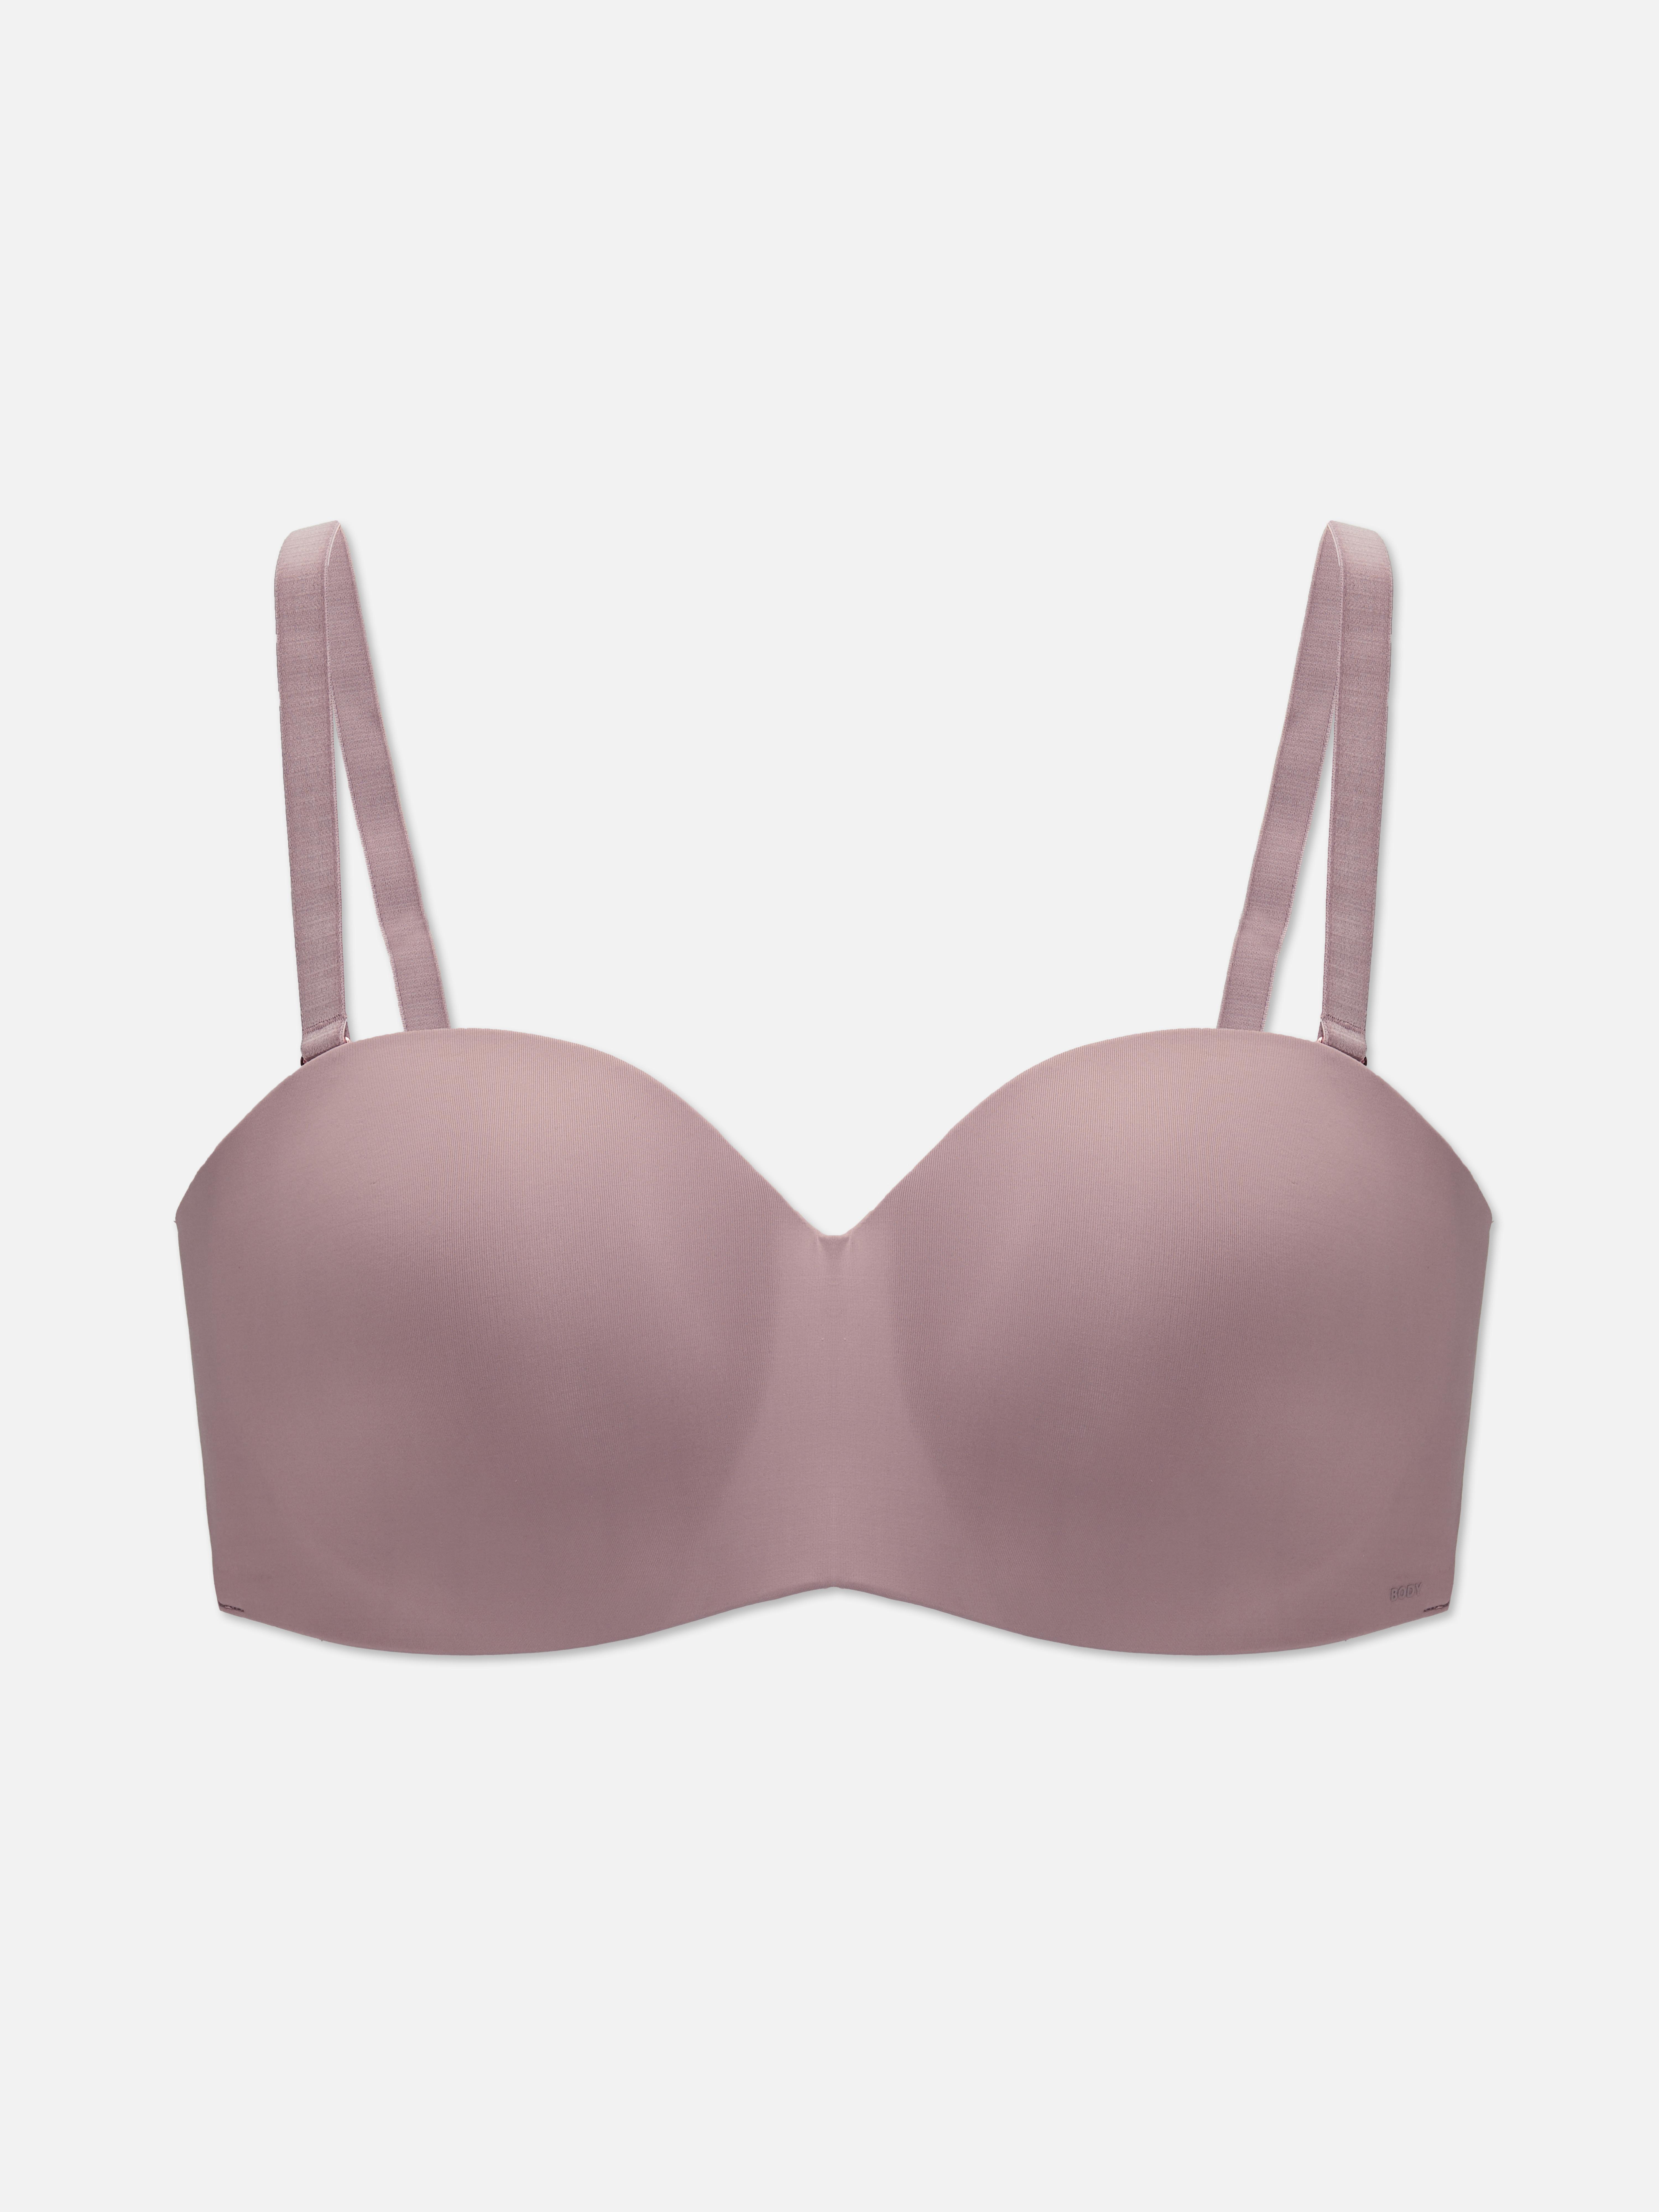 Bare The Smooth Multiway Strapless Bra 36DDD, Hazel at  Women's  Clothing store